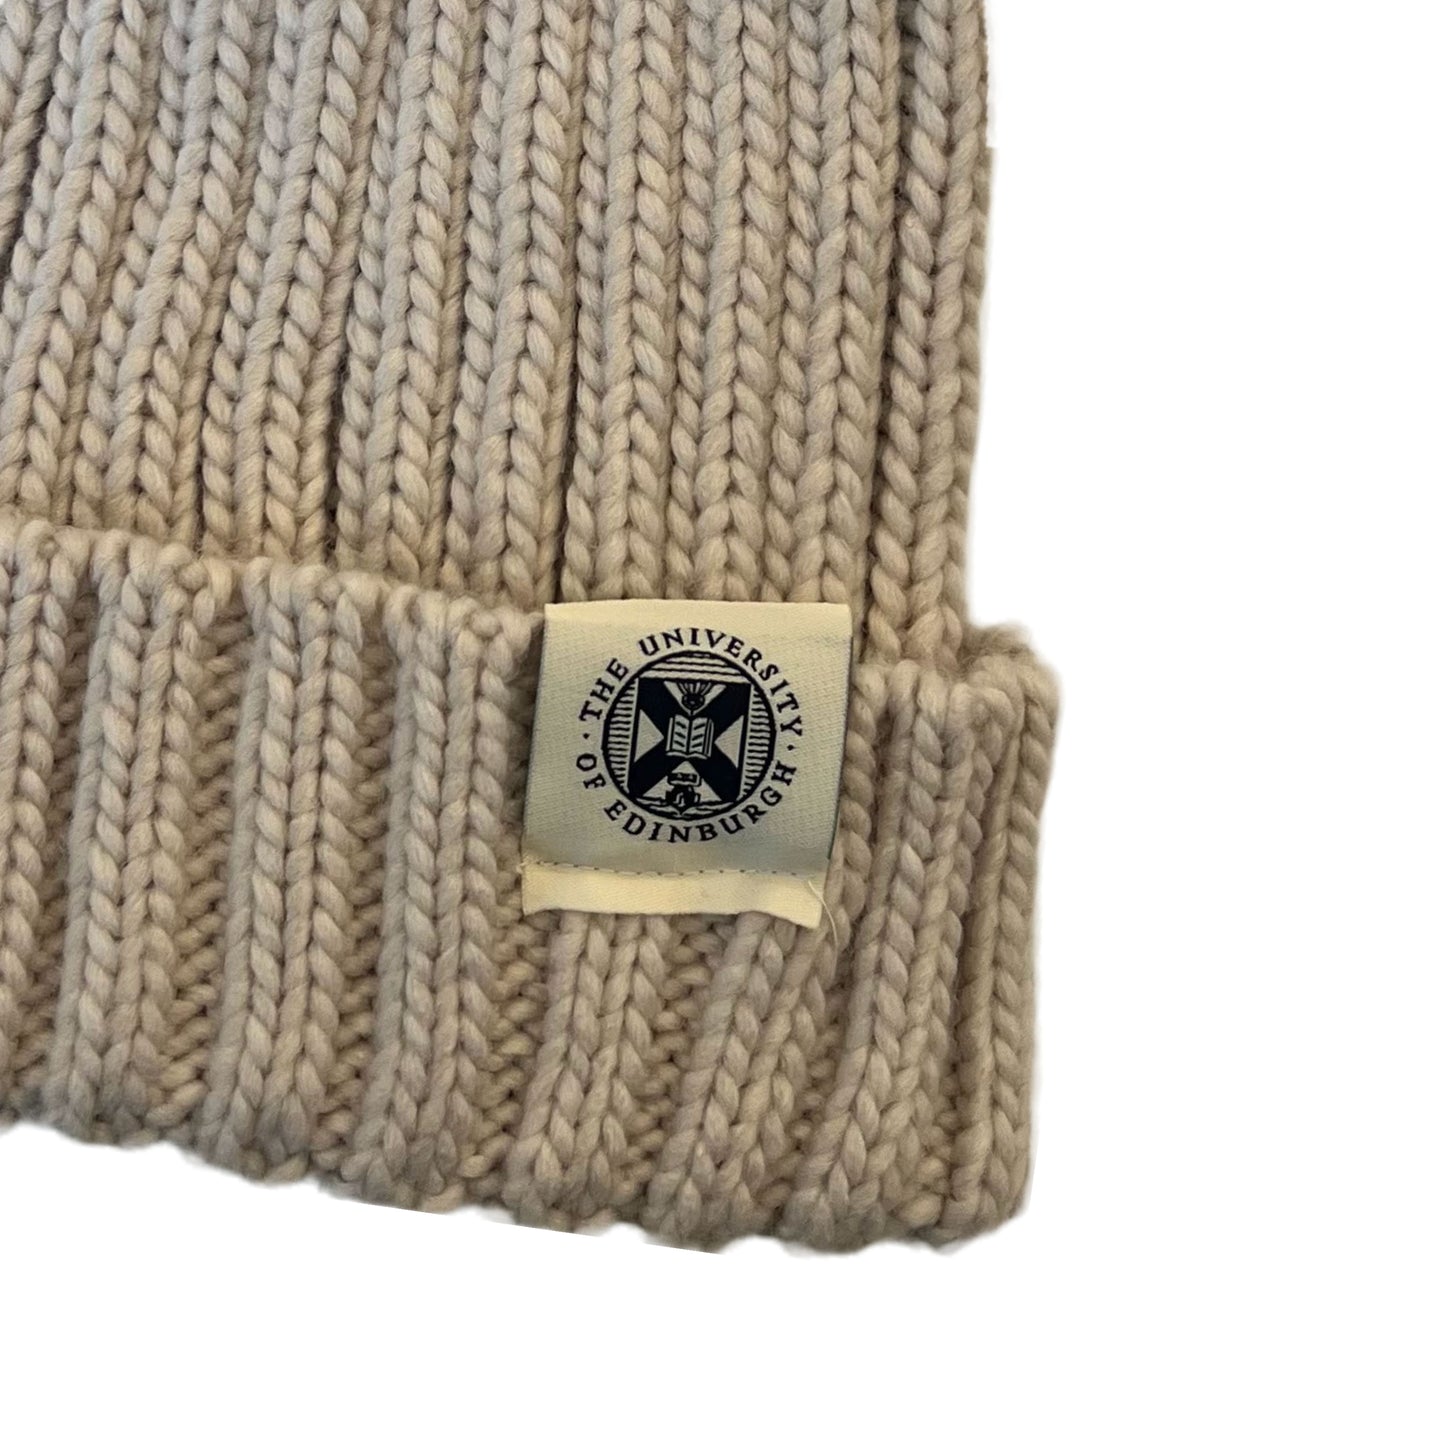 close up of oatmeal beanie with brown pom pom and woven tag featuring university crest in navy